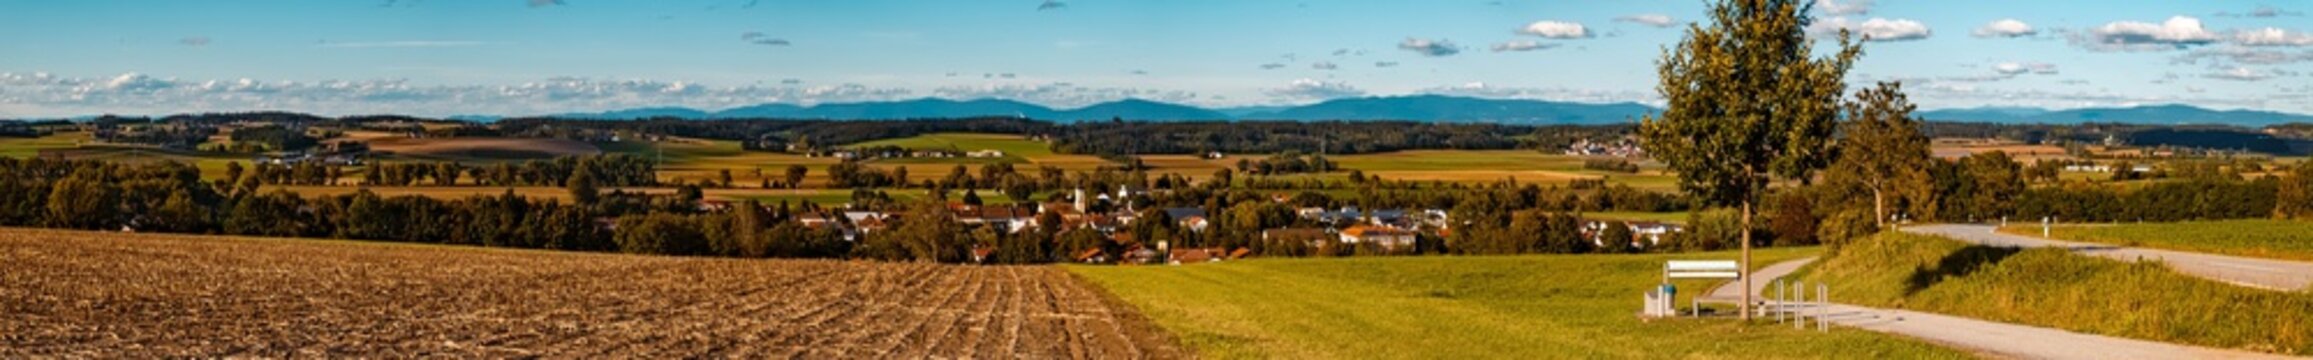 High resolution stitched panorama of a beautiful autumn or indian summer view with the Bavarian forest in the background near Eichendorf, Bavaria, Germany